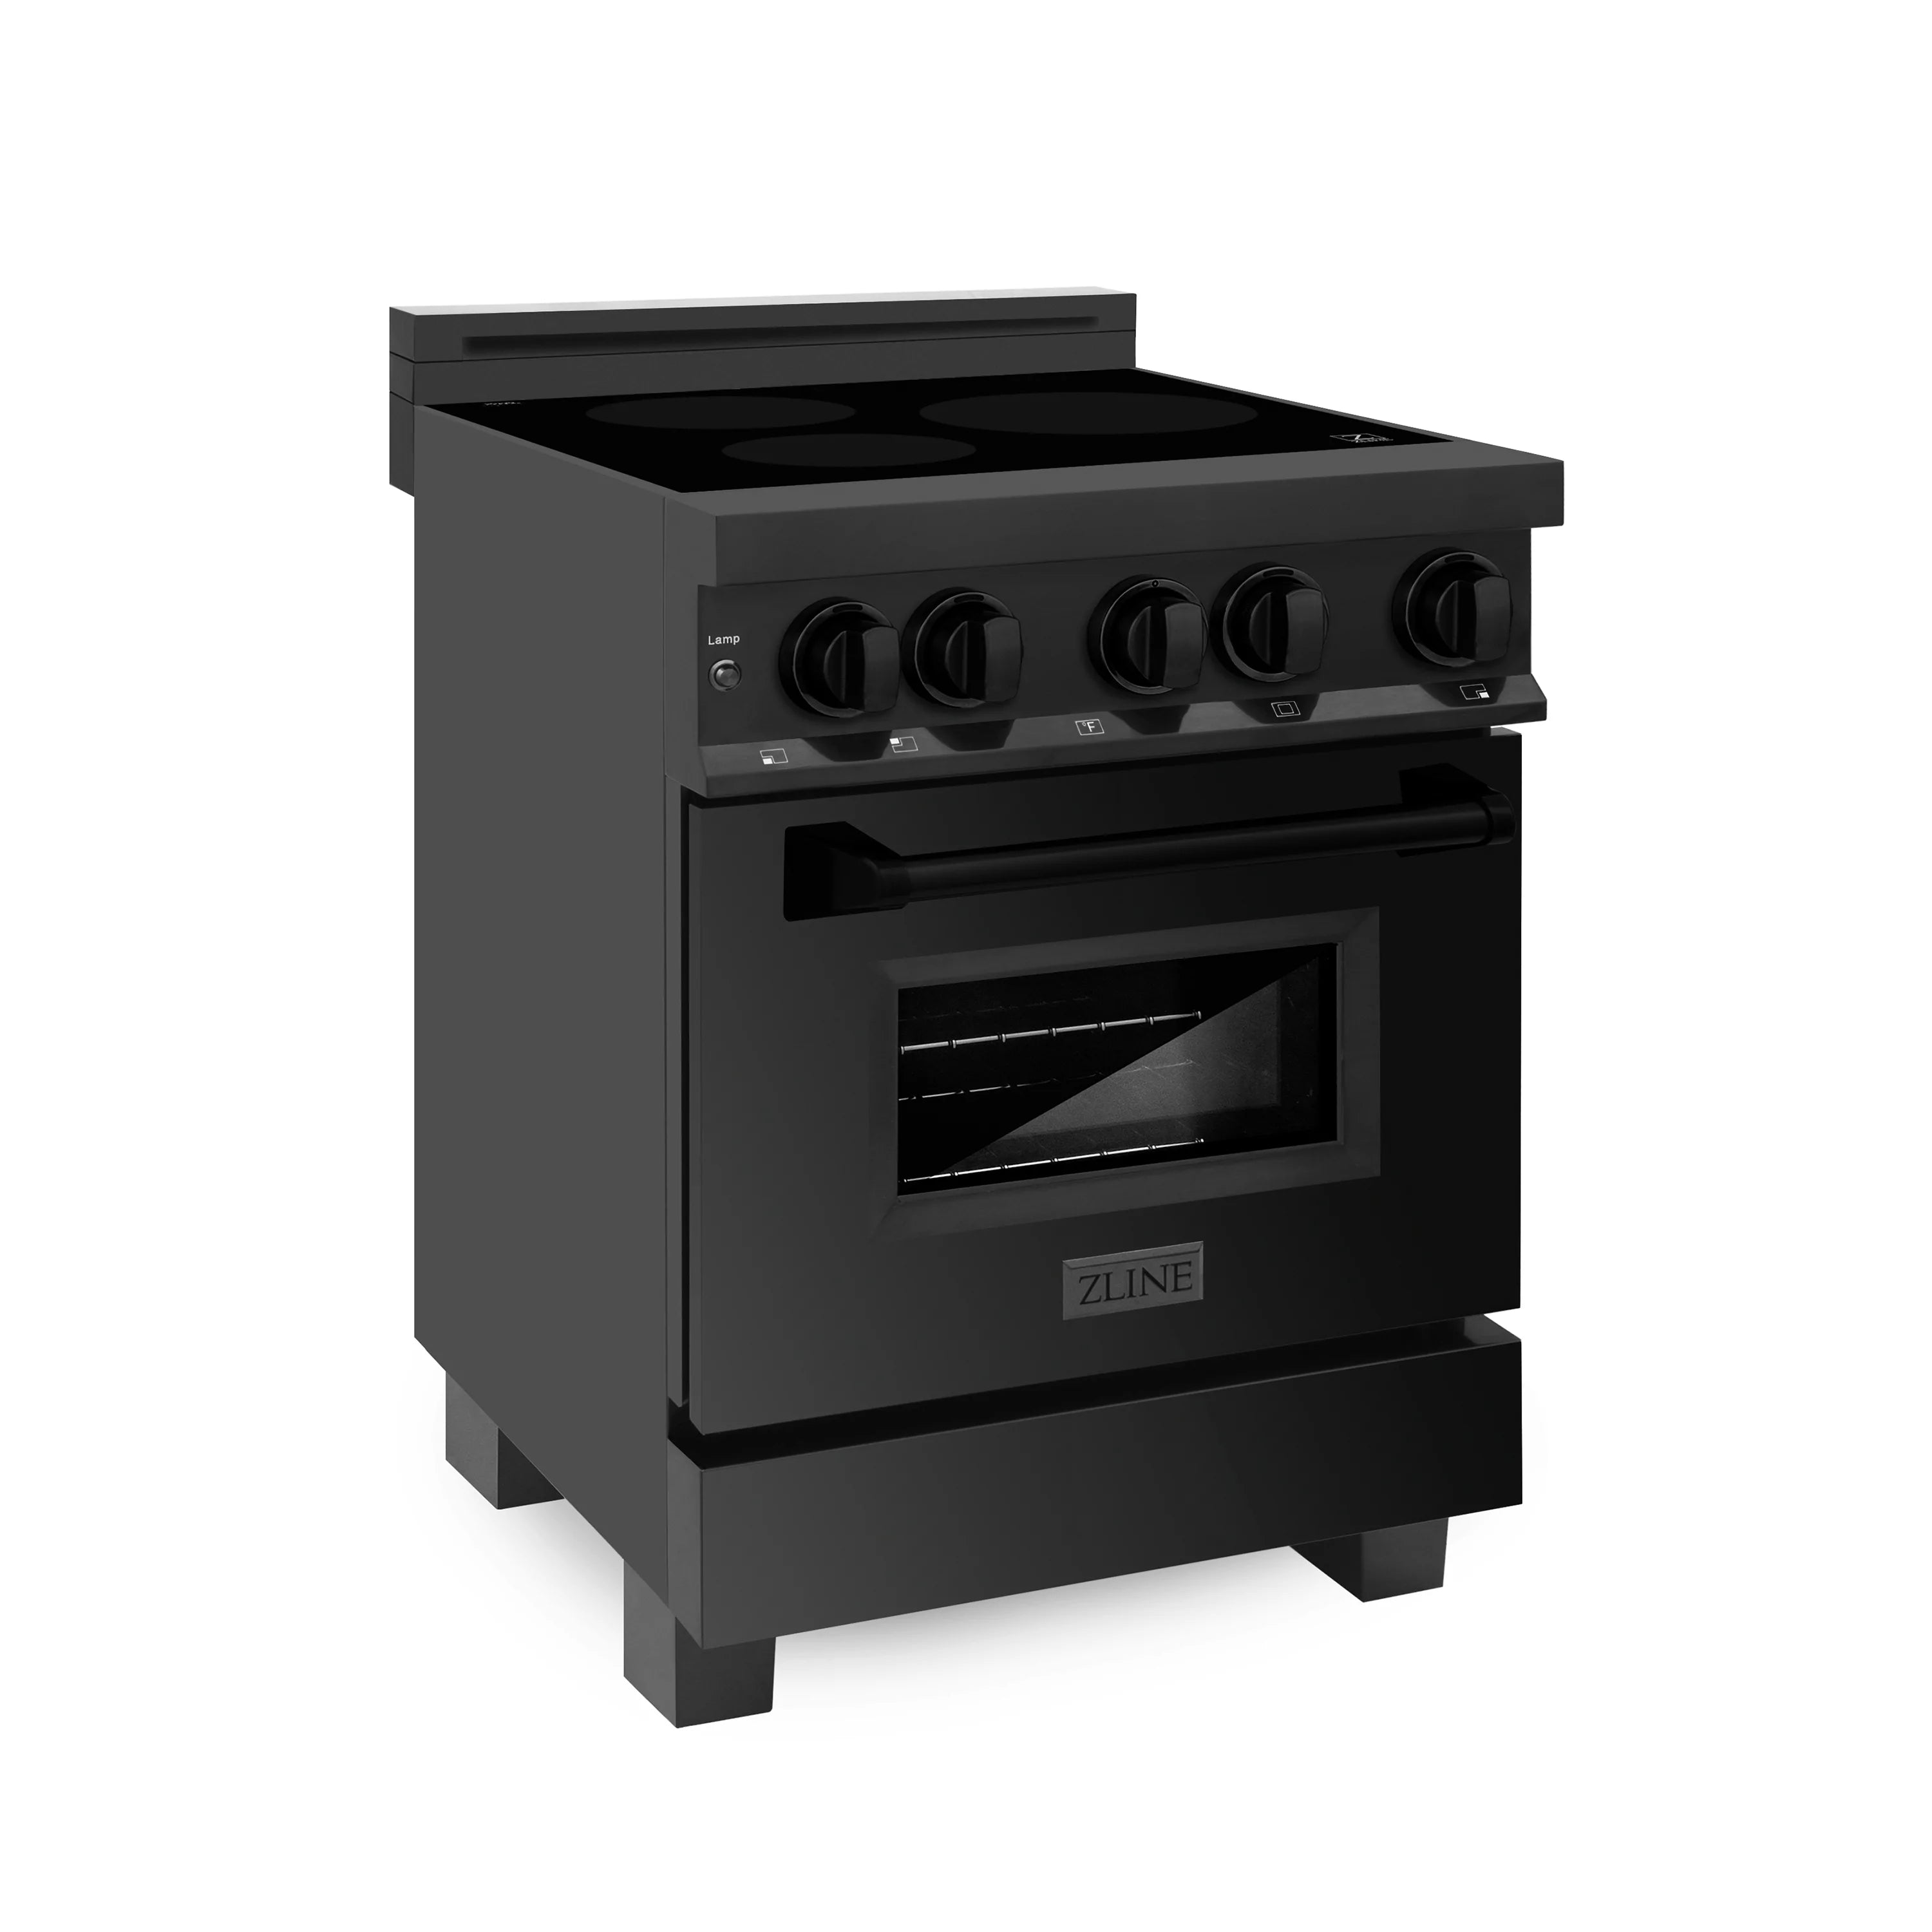 ZLINE 24" 2.8 cu. ft. Induction Range with a 3 Element Stove and Electric Oven in Black Stainless Steel - RAIND-BS-24